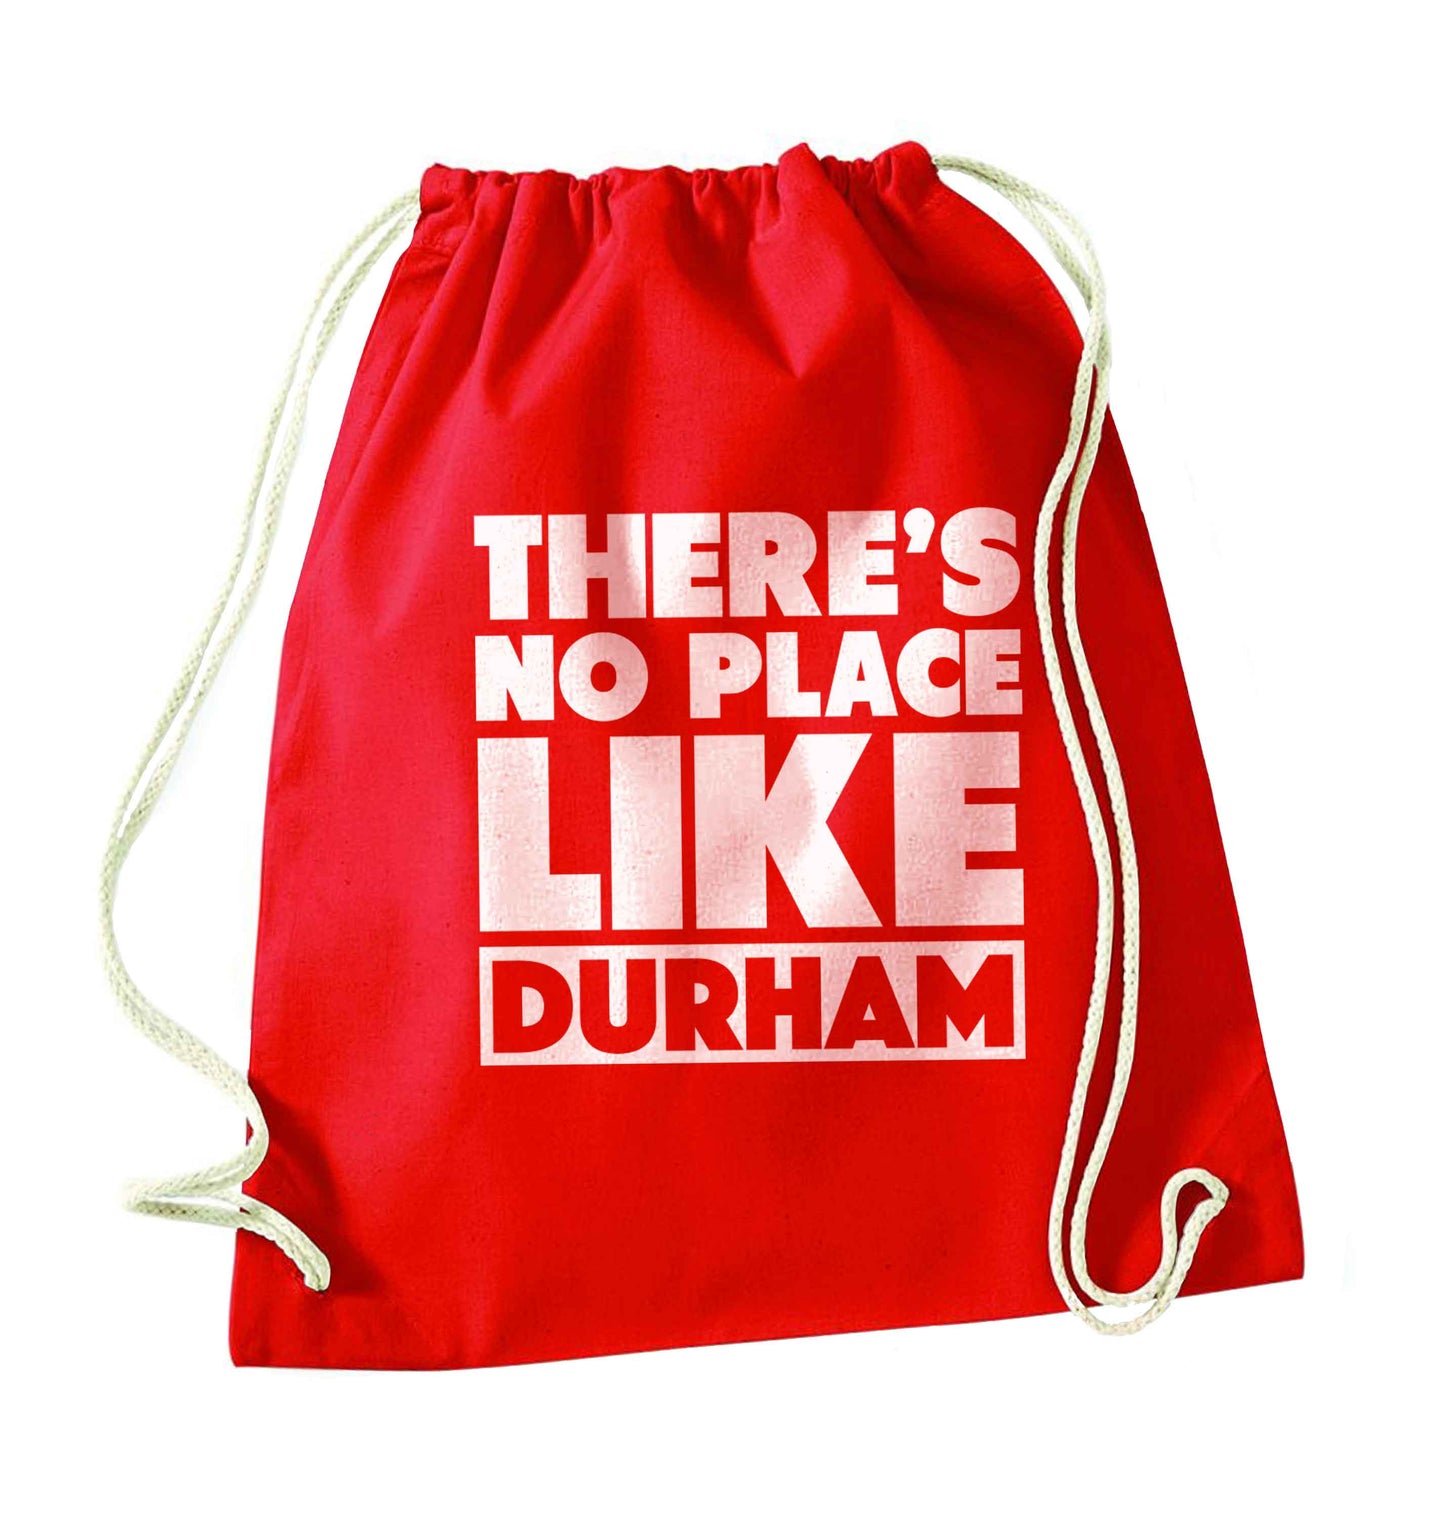 There's no place like Durham red drawstring bag 